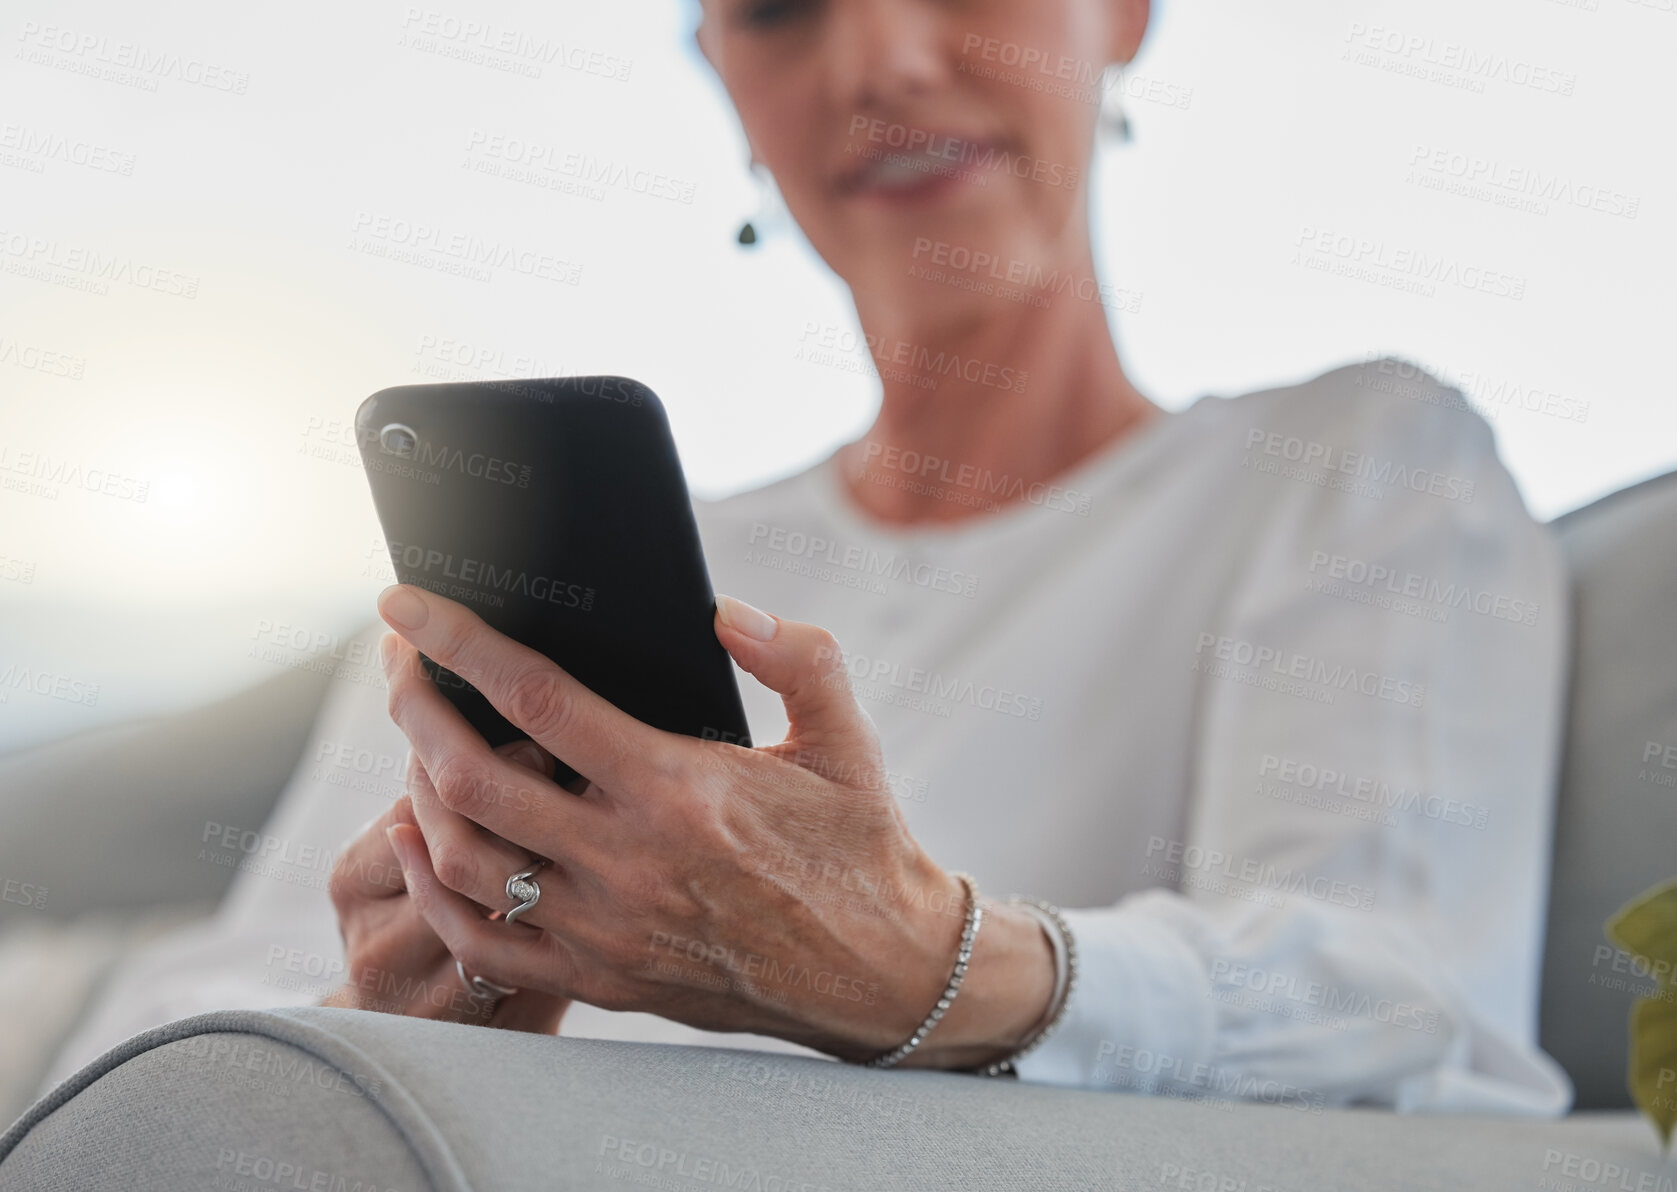 Buy stock photo Cropped shot of an unrecognizable senior woman sending a text while relaxing in her living room at home